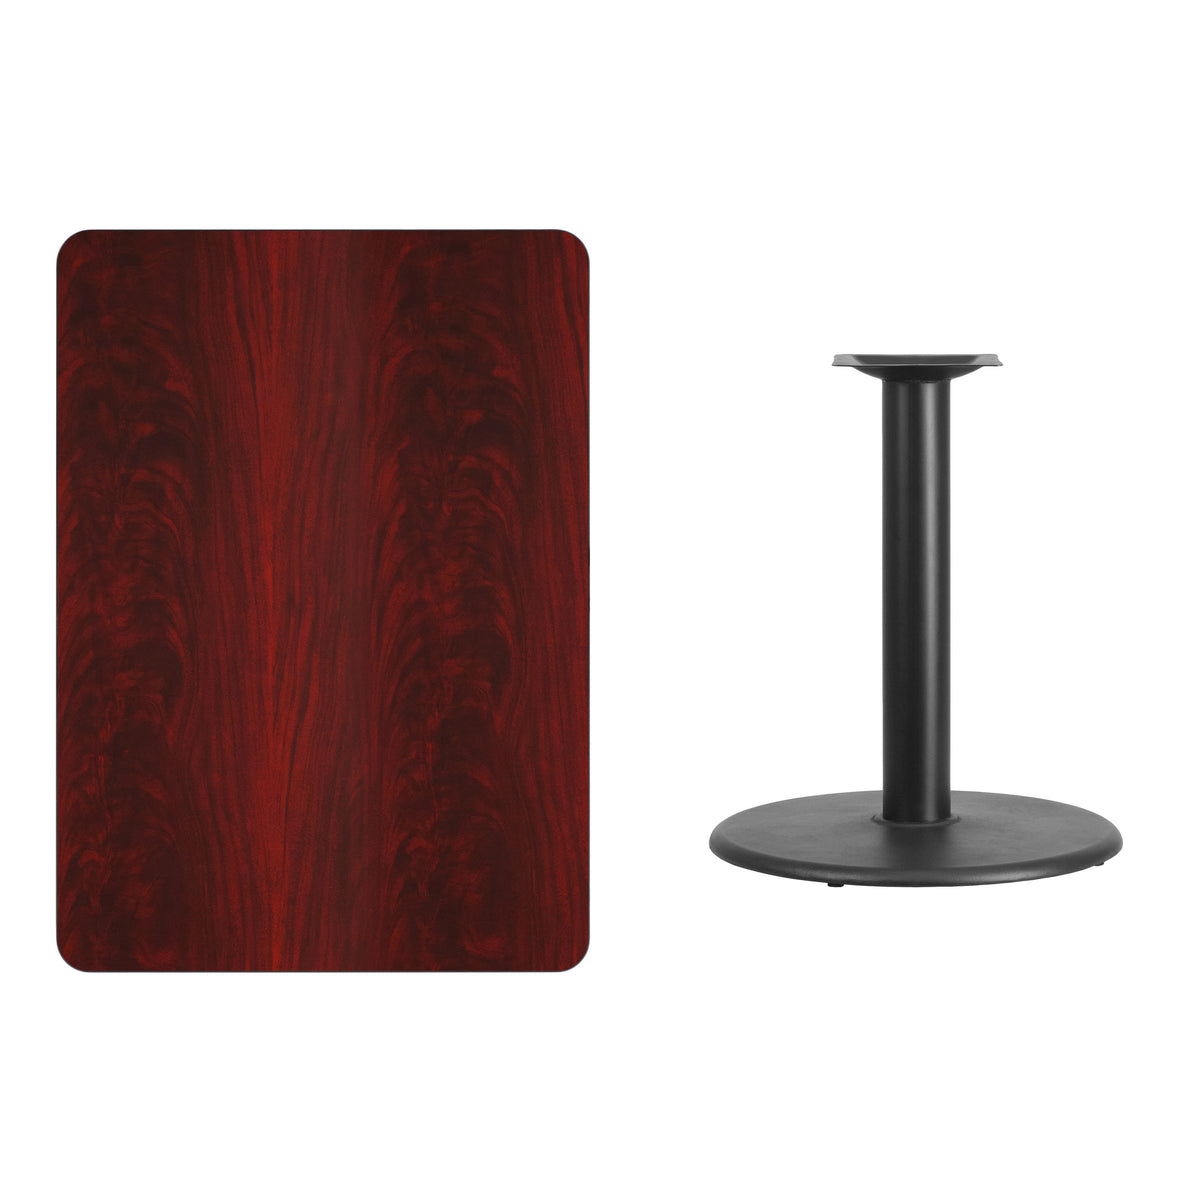 Mahogany |#| 30inch x 42inch Mahogany Laminate Table Top with 24inch Round Table Height Base